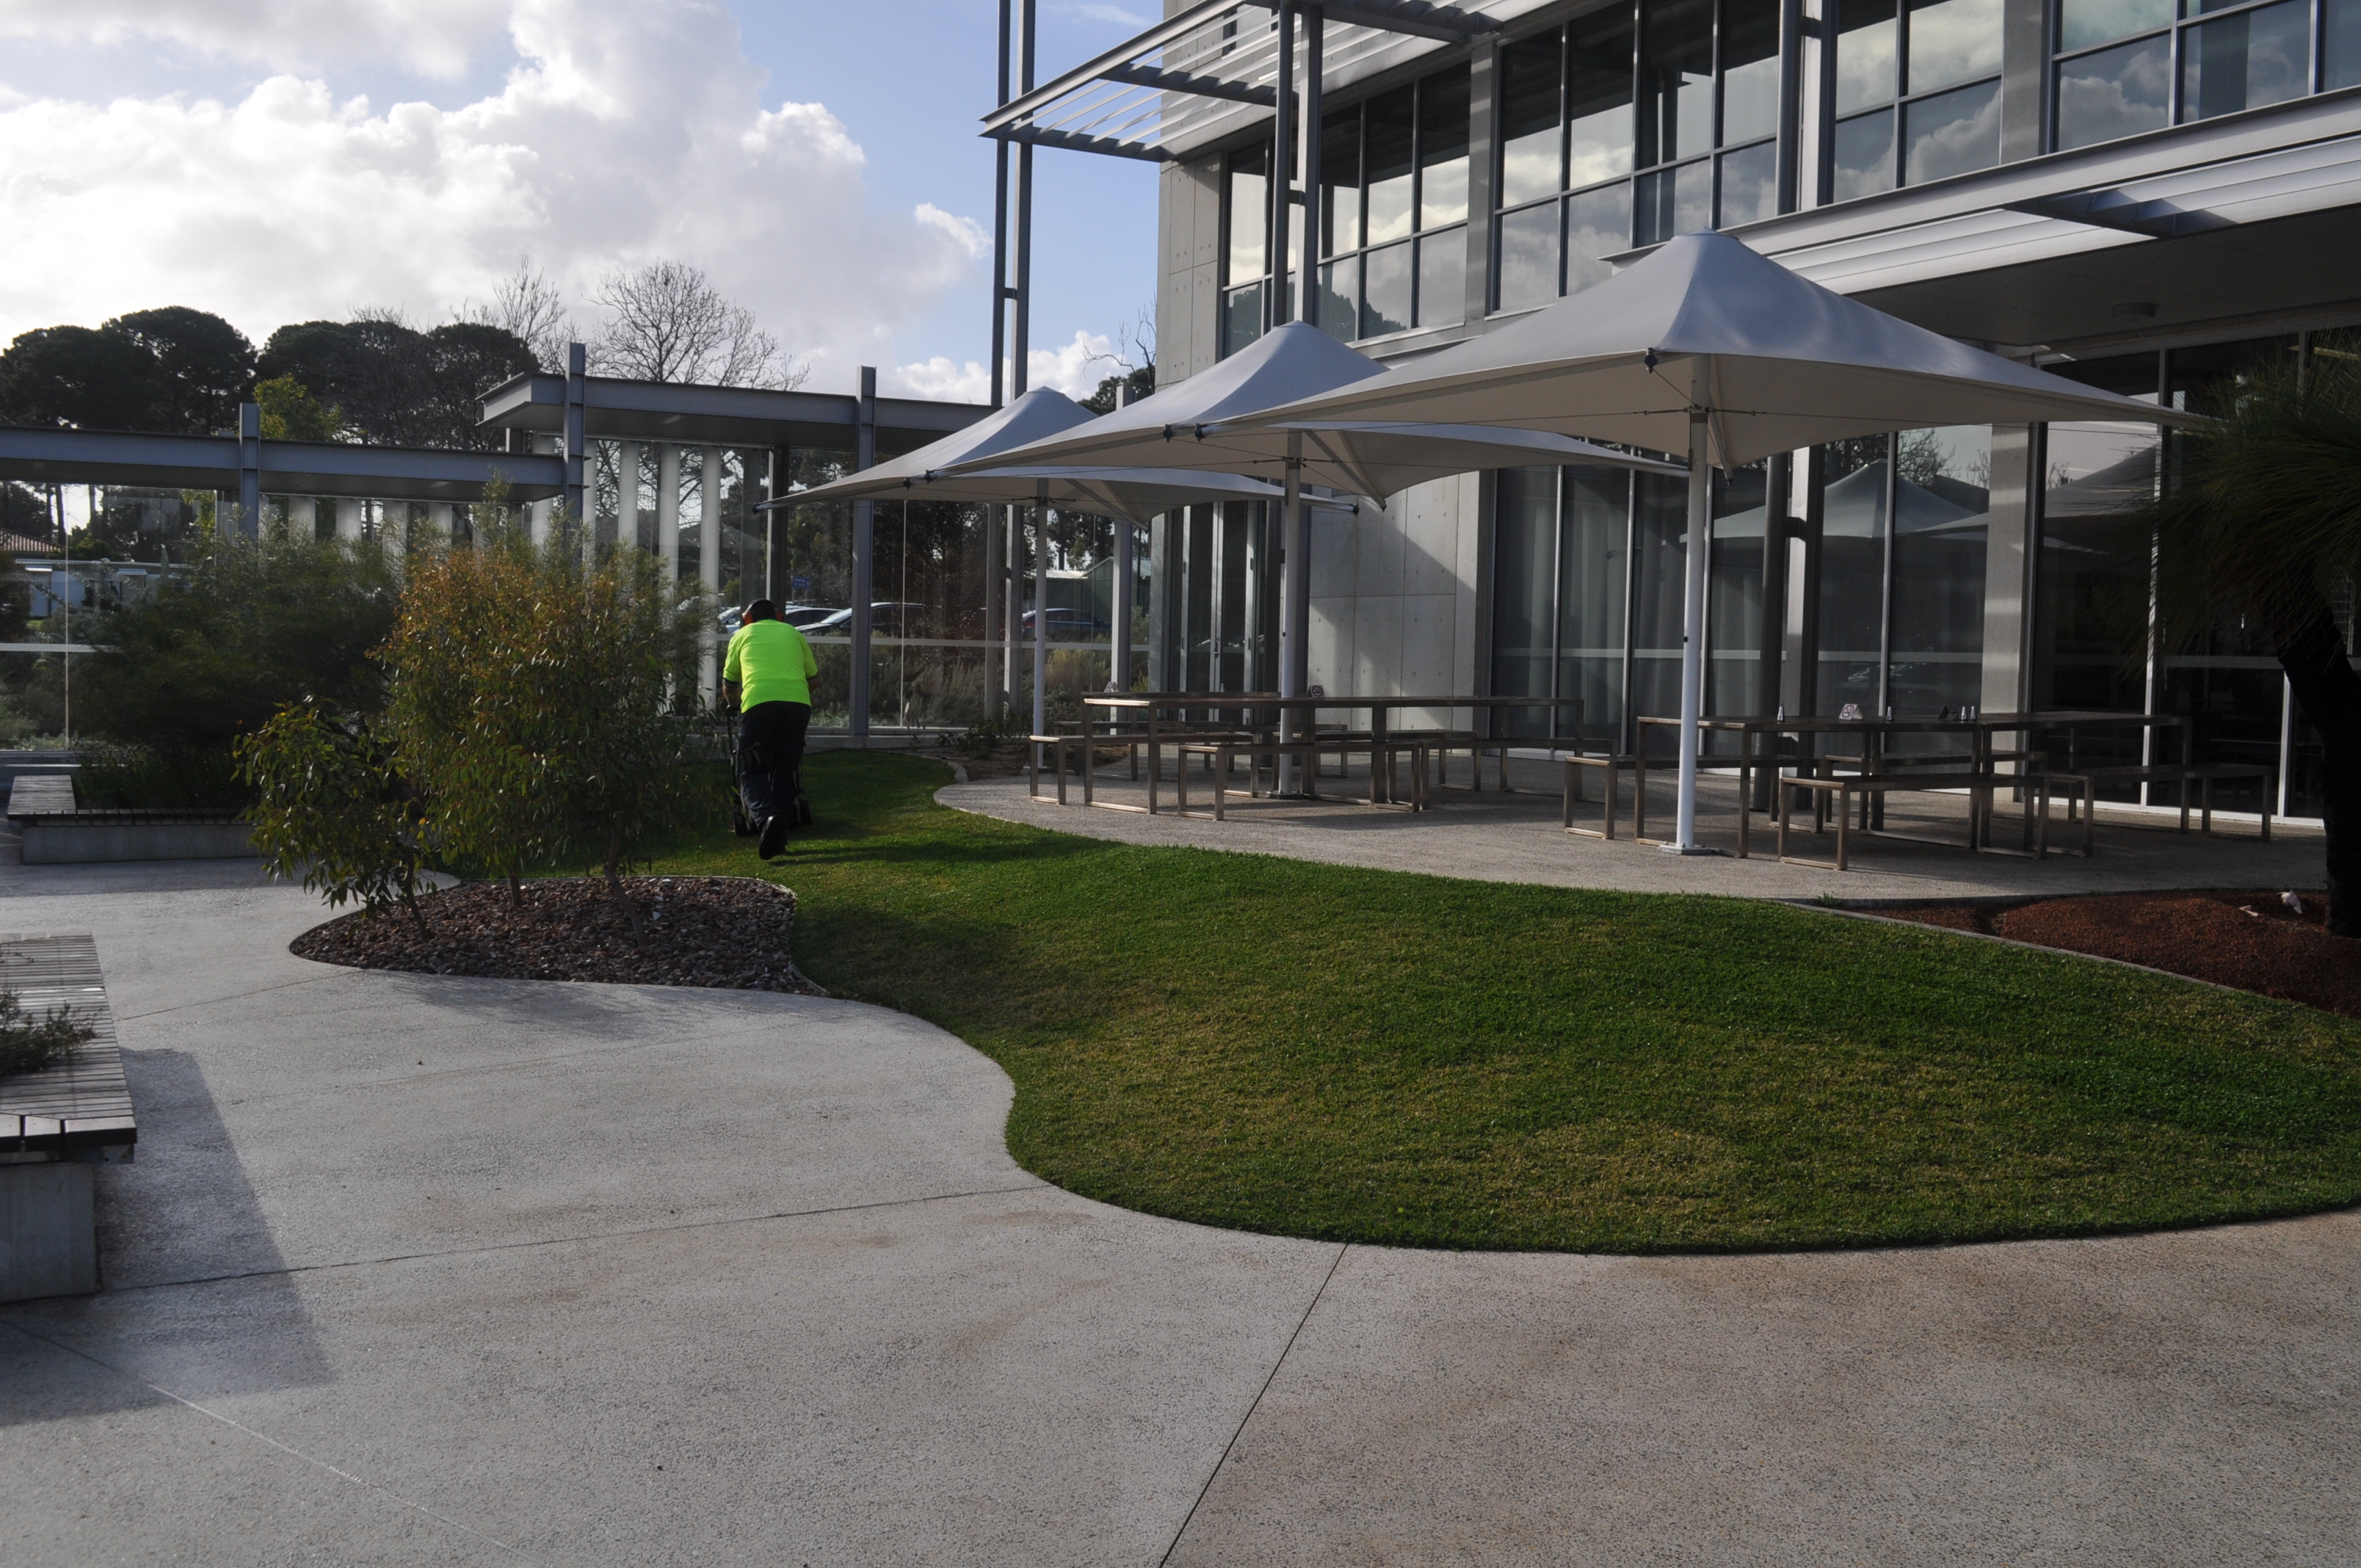 Reliable, cost efficient landscaping services for your business